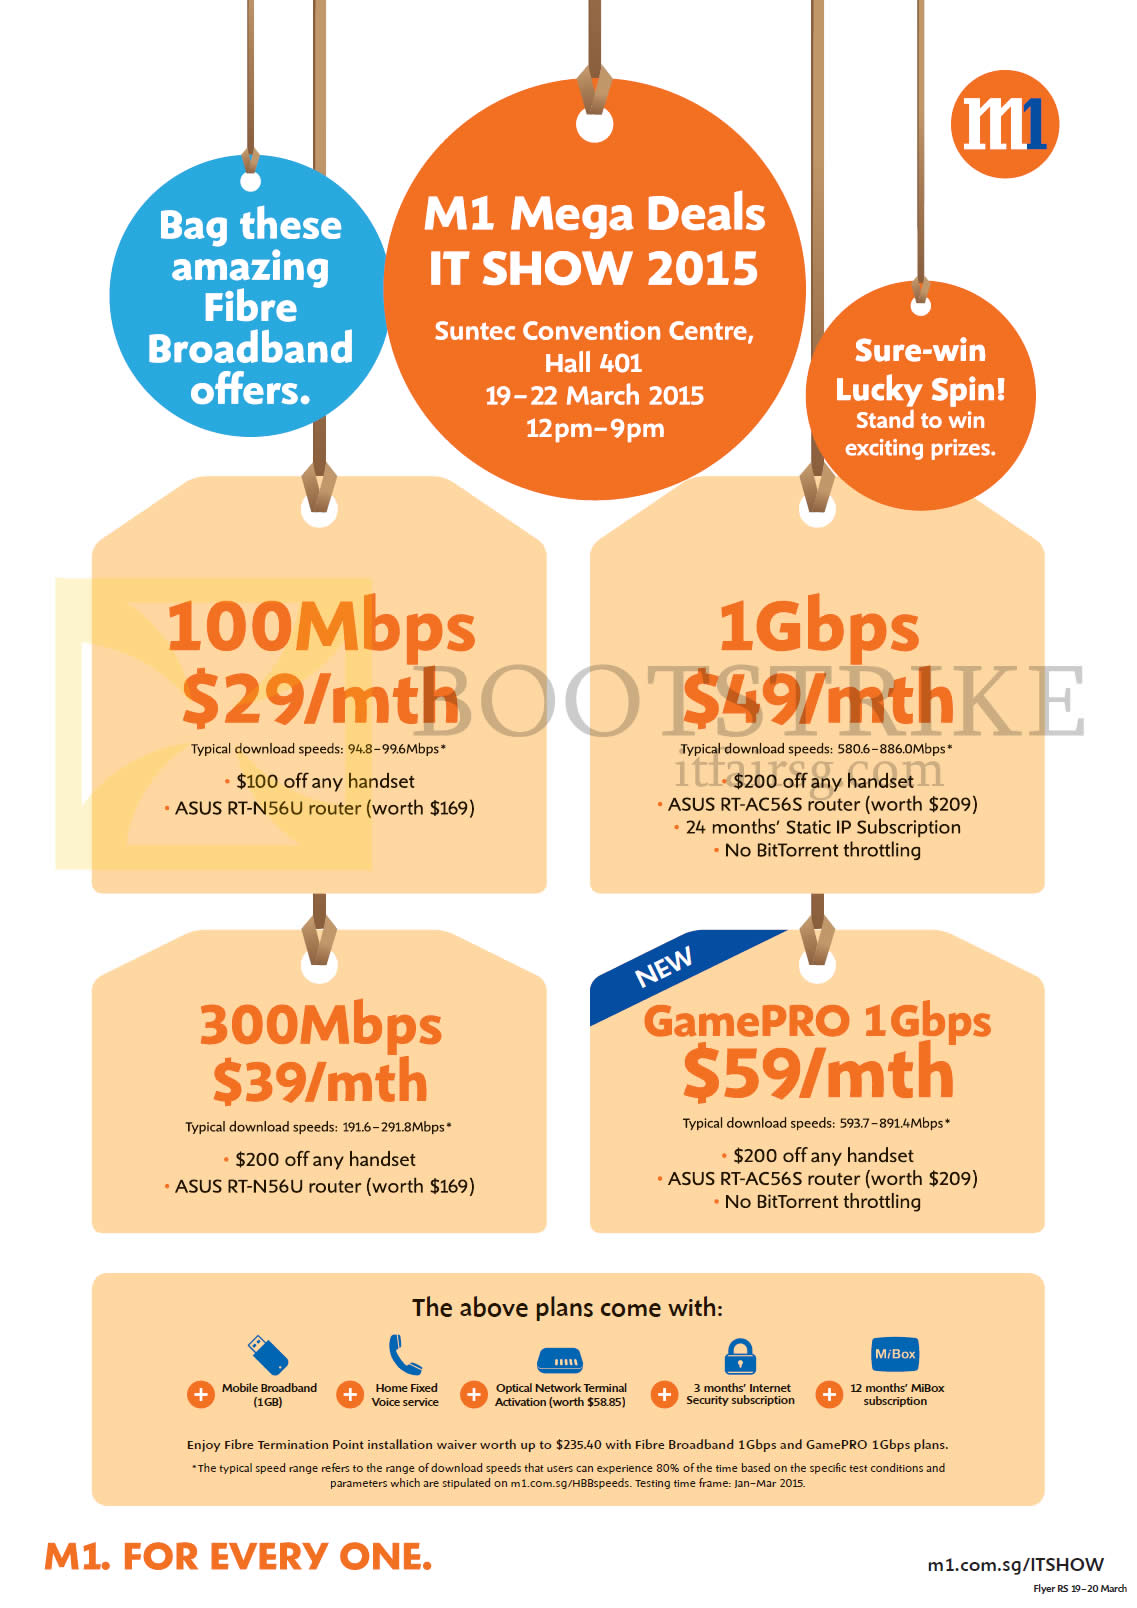 IT SHOW 2015 price list image brochure of M1 Fibre Broadband Packages 100Mbps, 300Mbps, 1Gbps, GamePRO 1Gbps